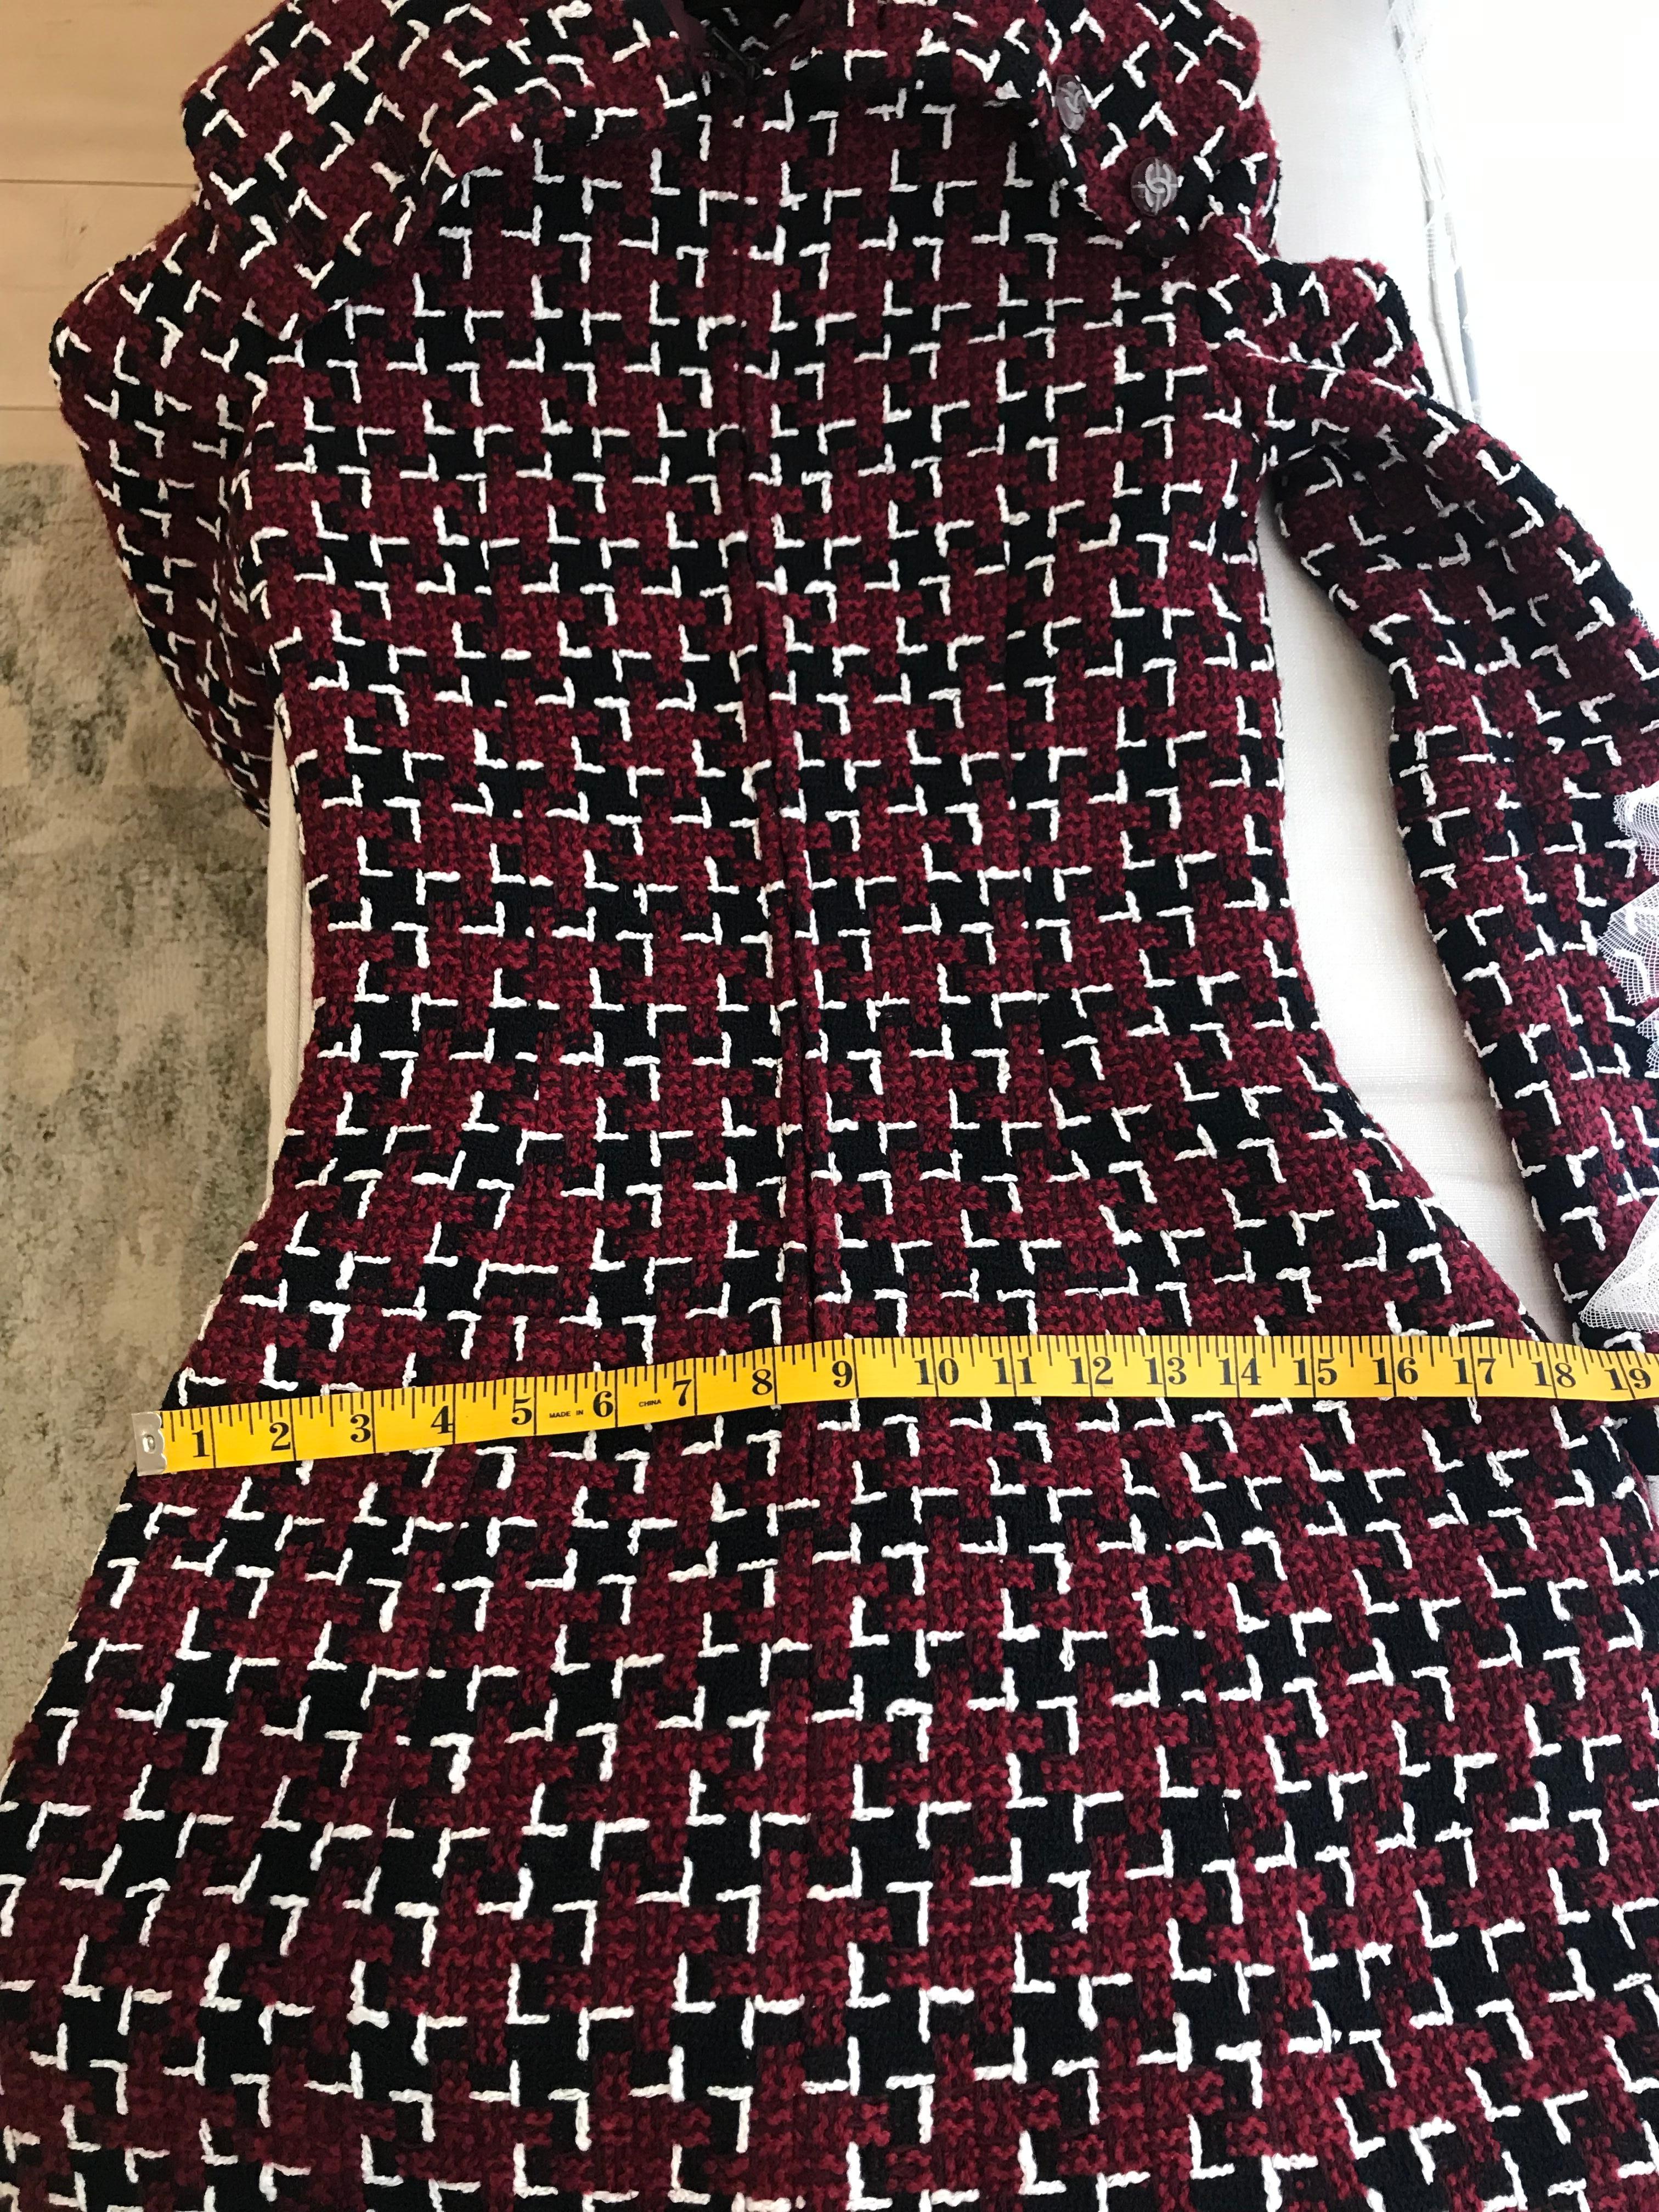 Chanel Cocktail Tweed Dress in Burgundy, Black and White New with tag 10